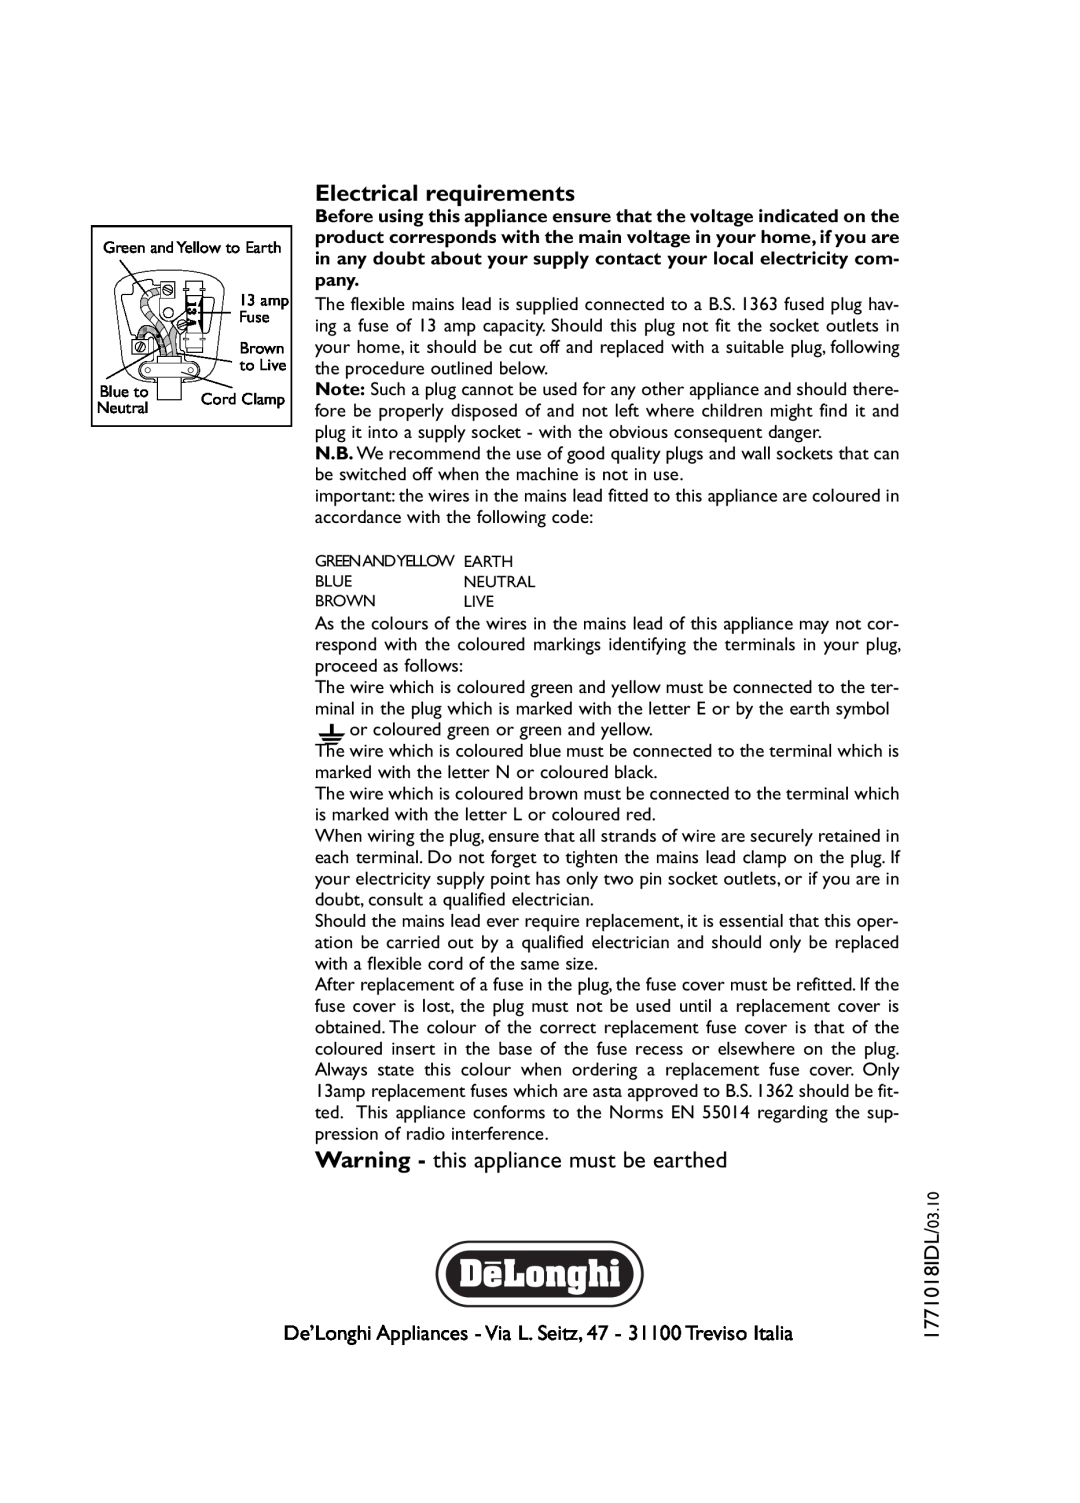 DeLonghi KG 79, KG 89 manual Electrical requirements, Warning - this appliance must be earthed 